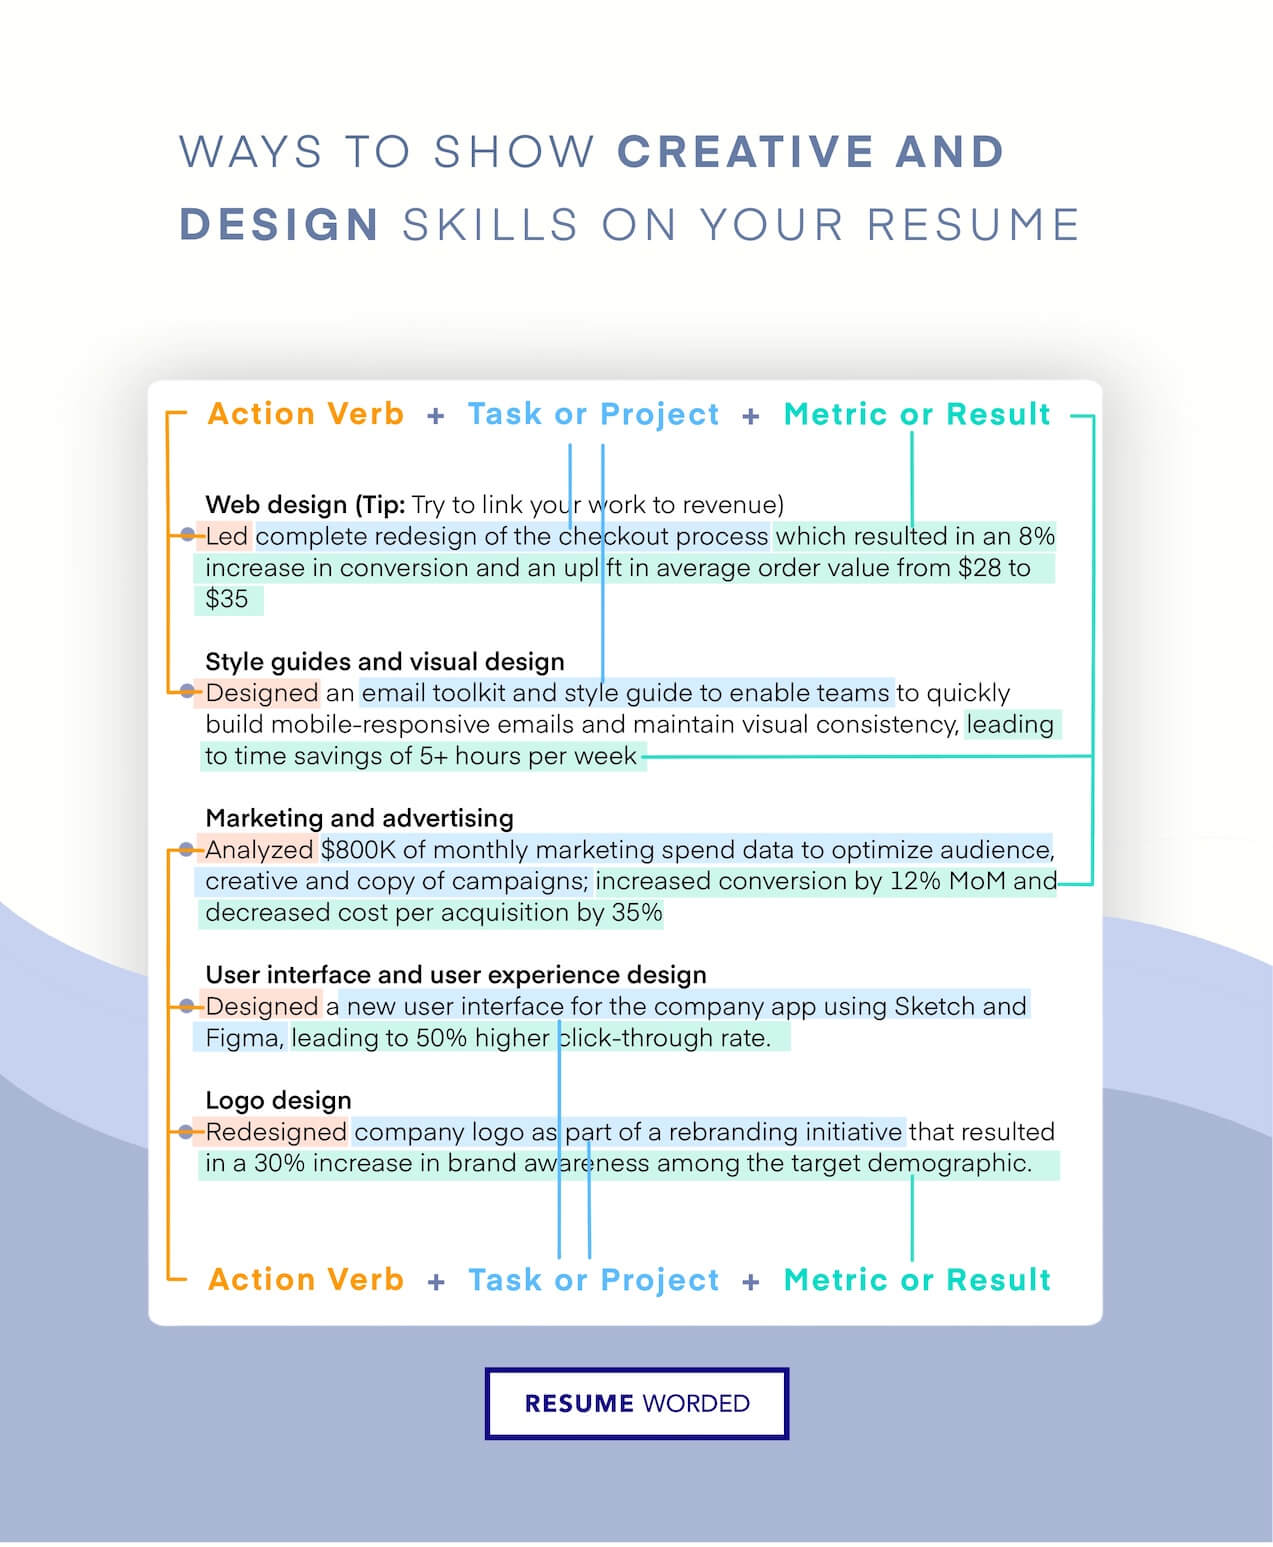 Illustrate your proficiency in Agile and Scrum - Product Owner CV